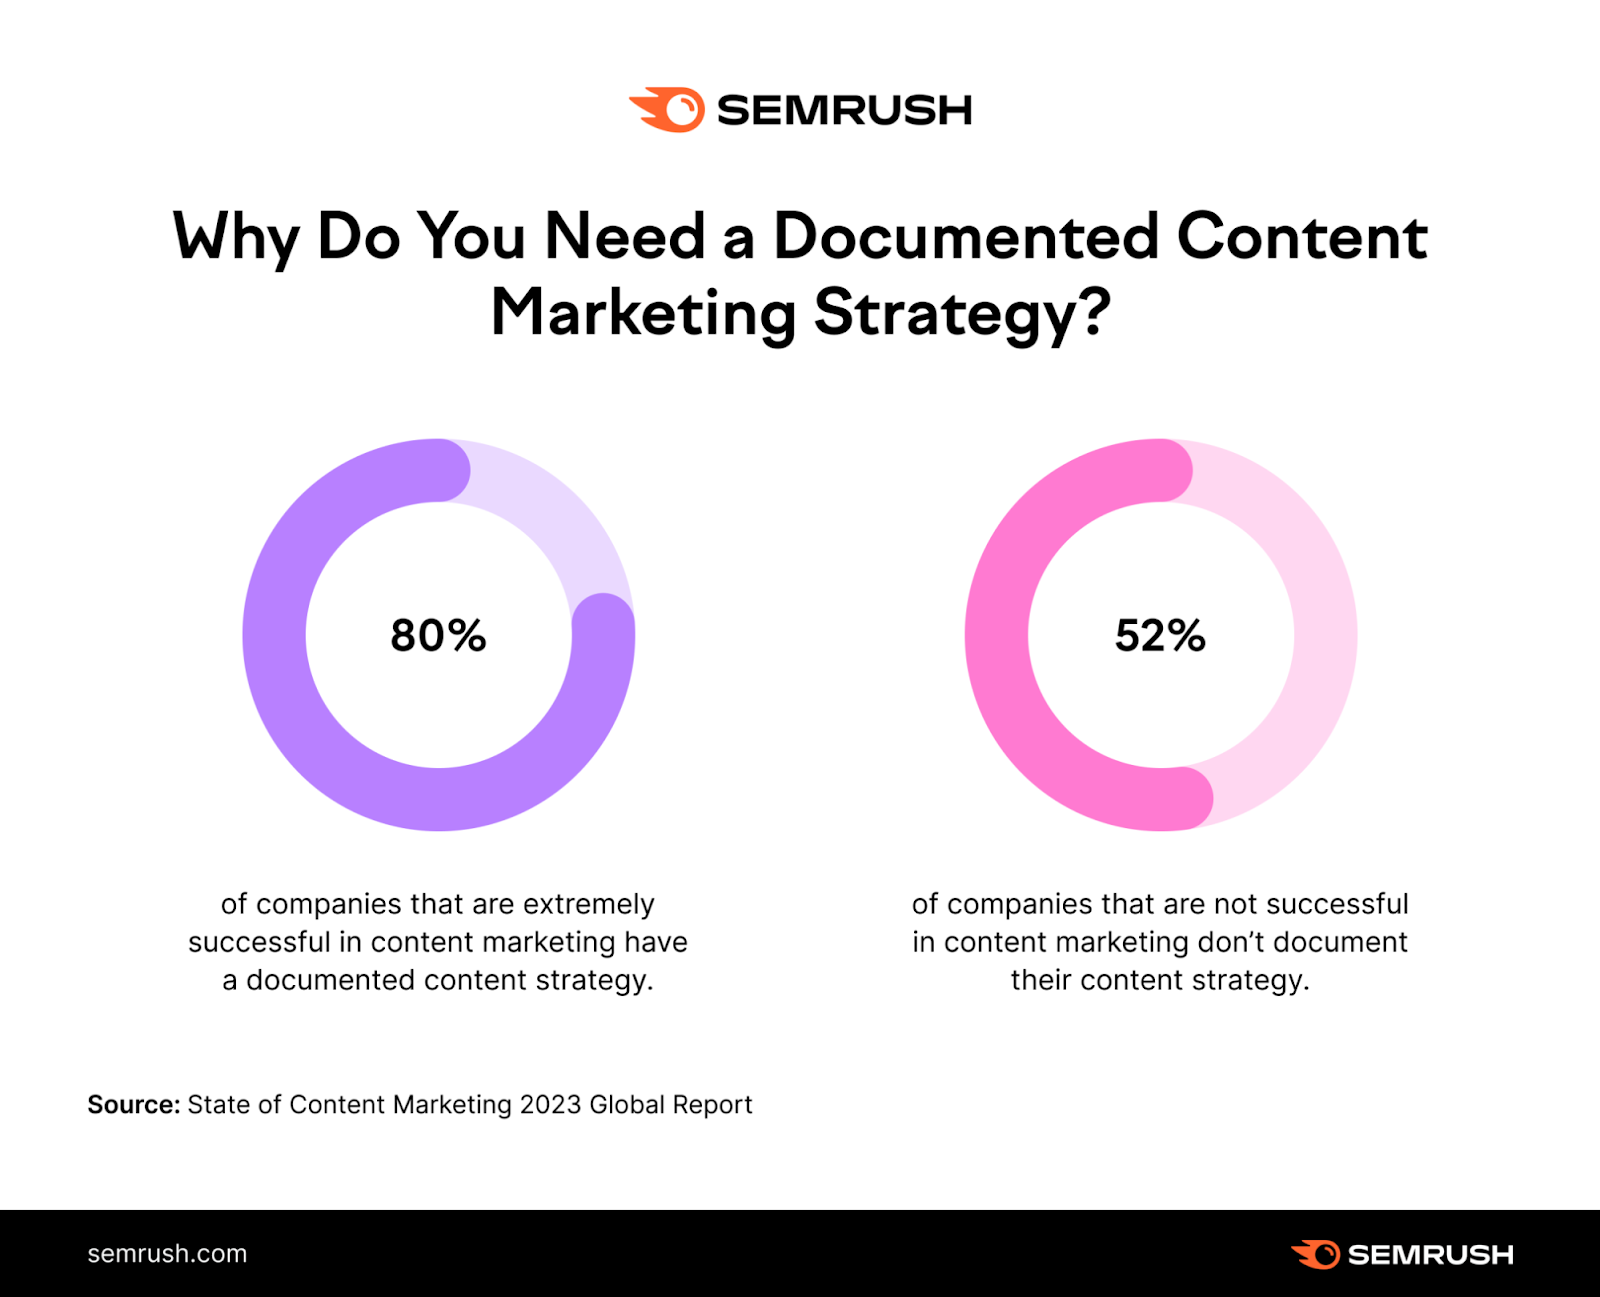 Why do you need a documented content marketing strategy